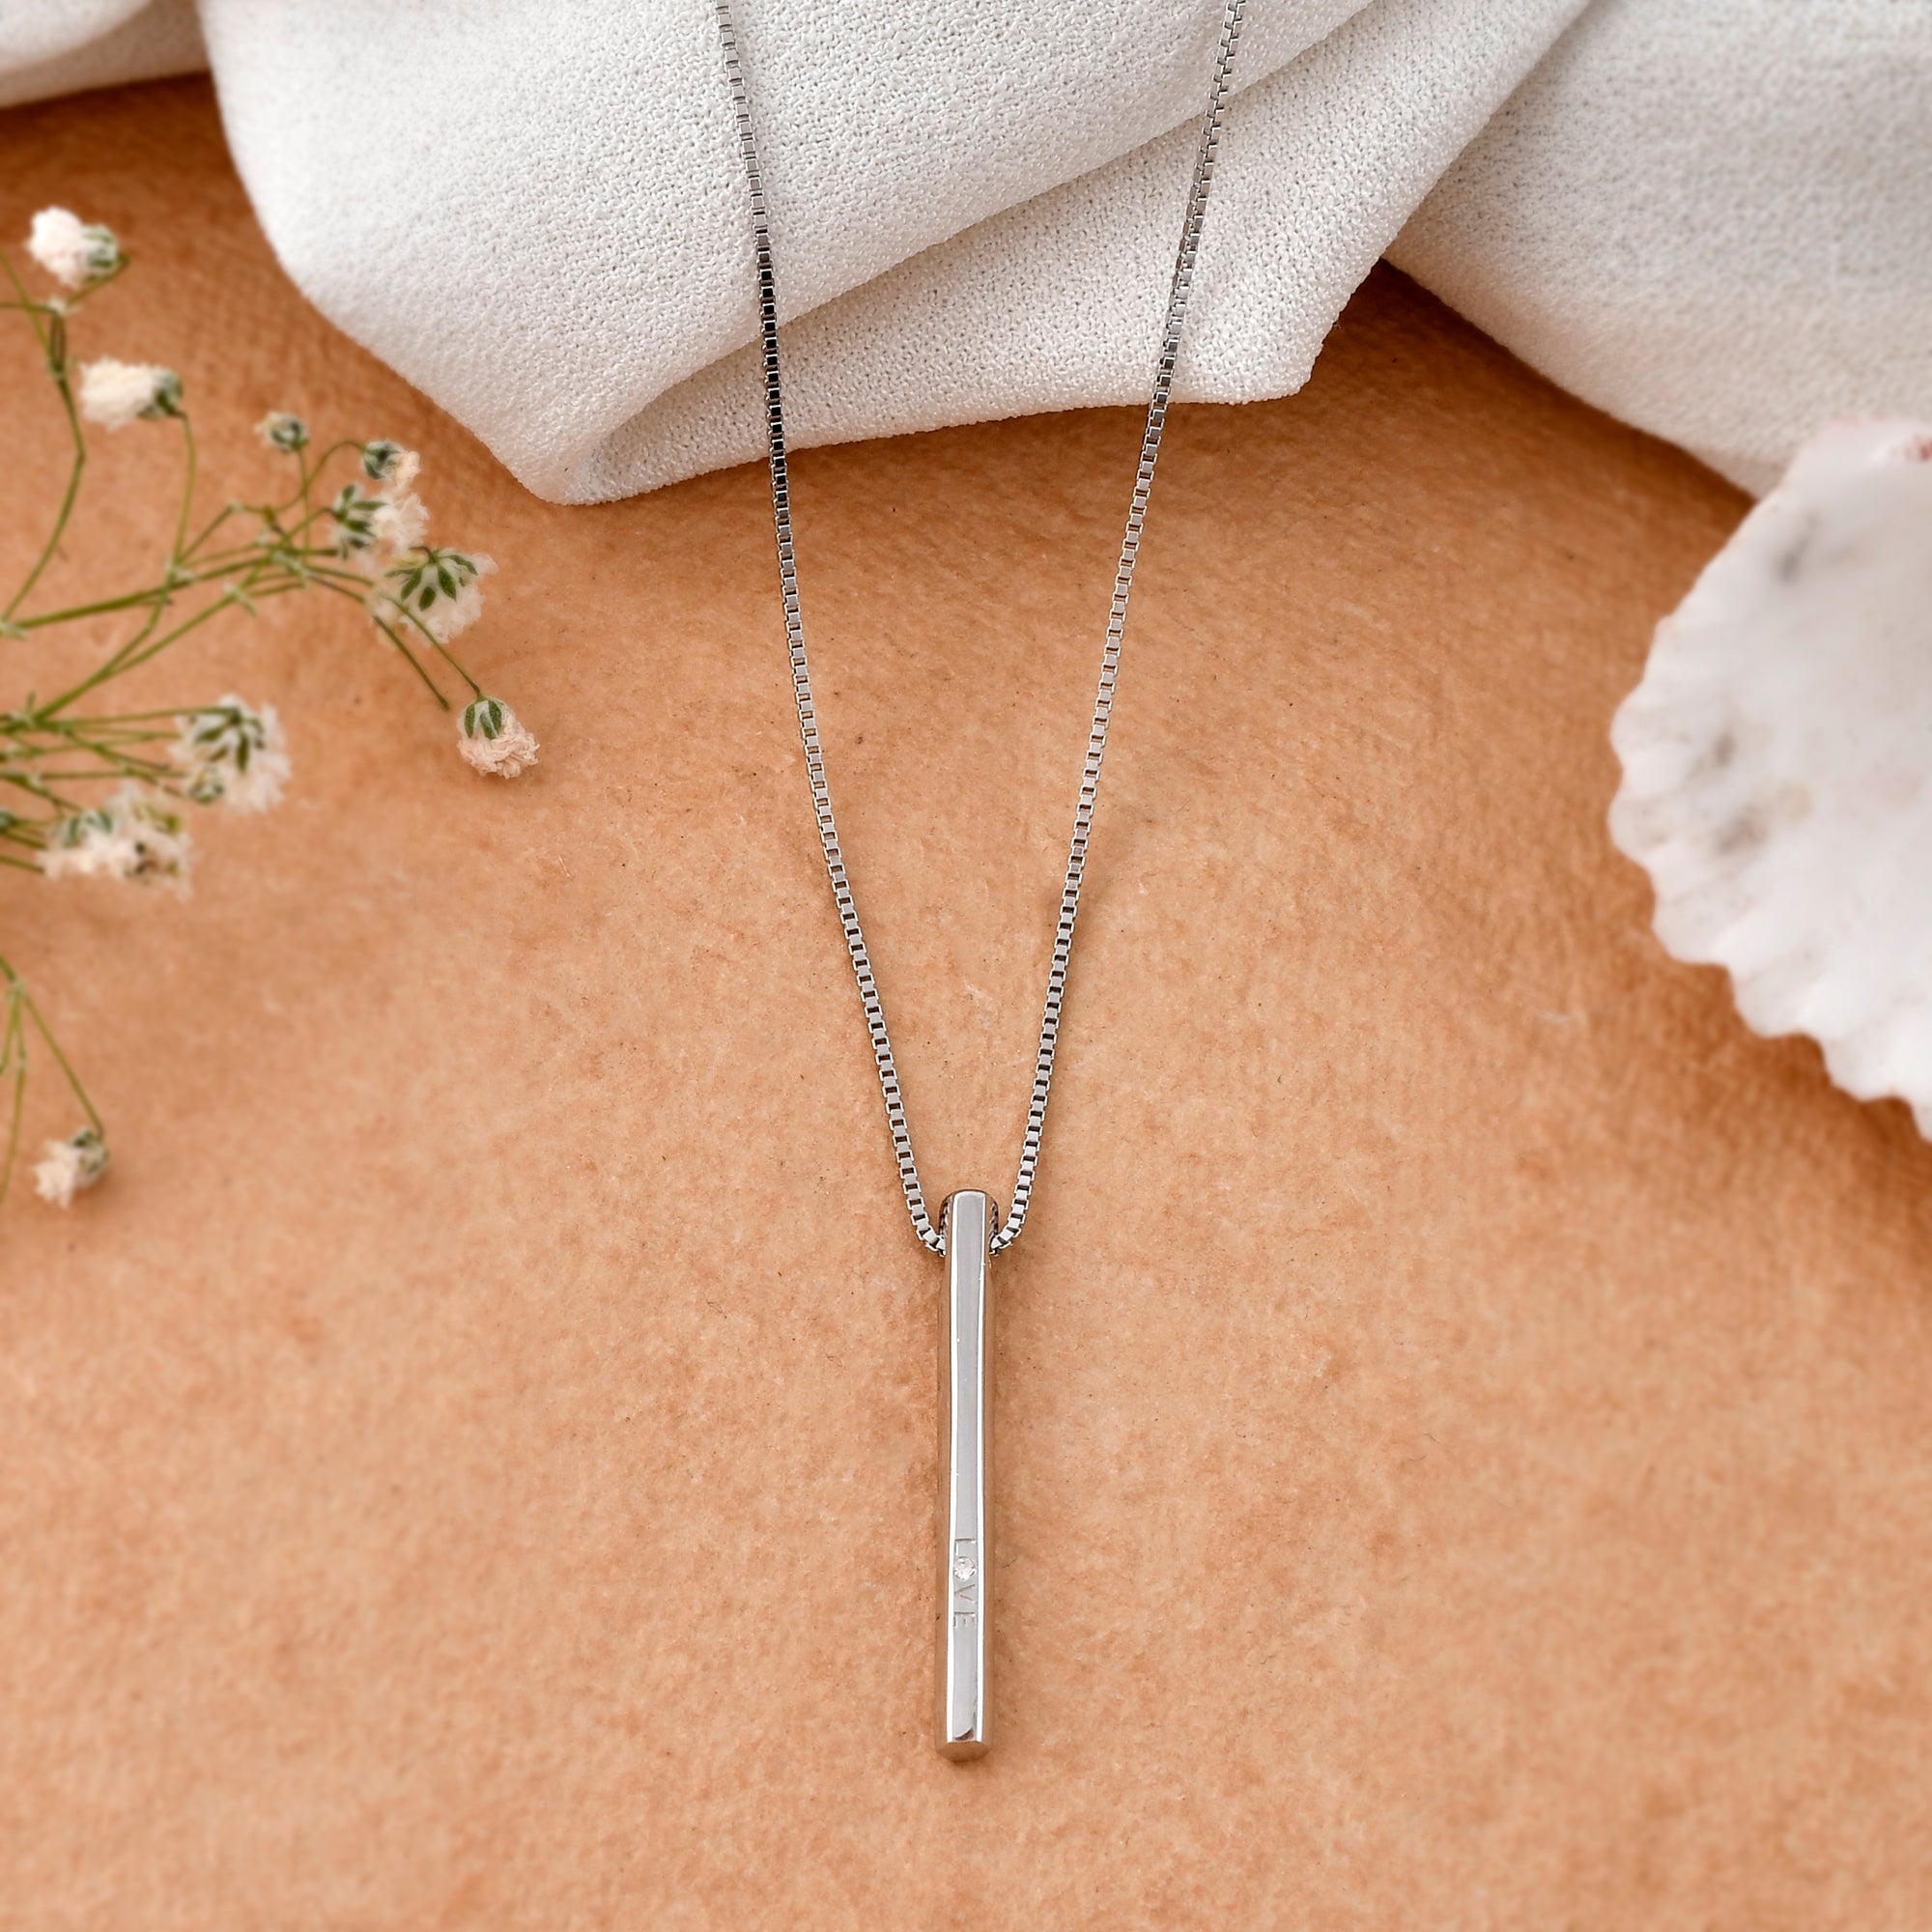 Jessica Decarlo - Hammered silver bar necklace - Norbu